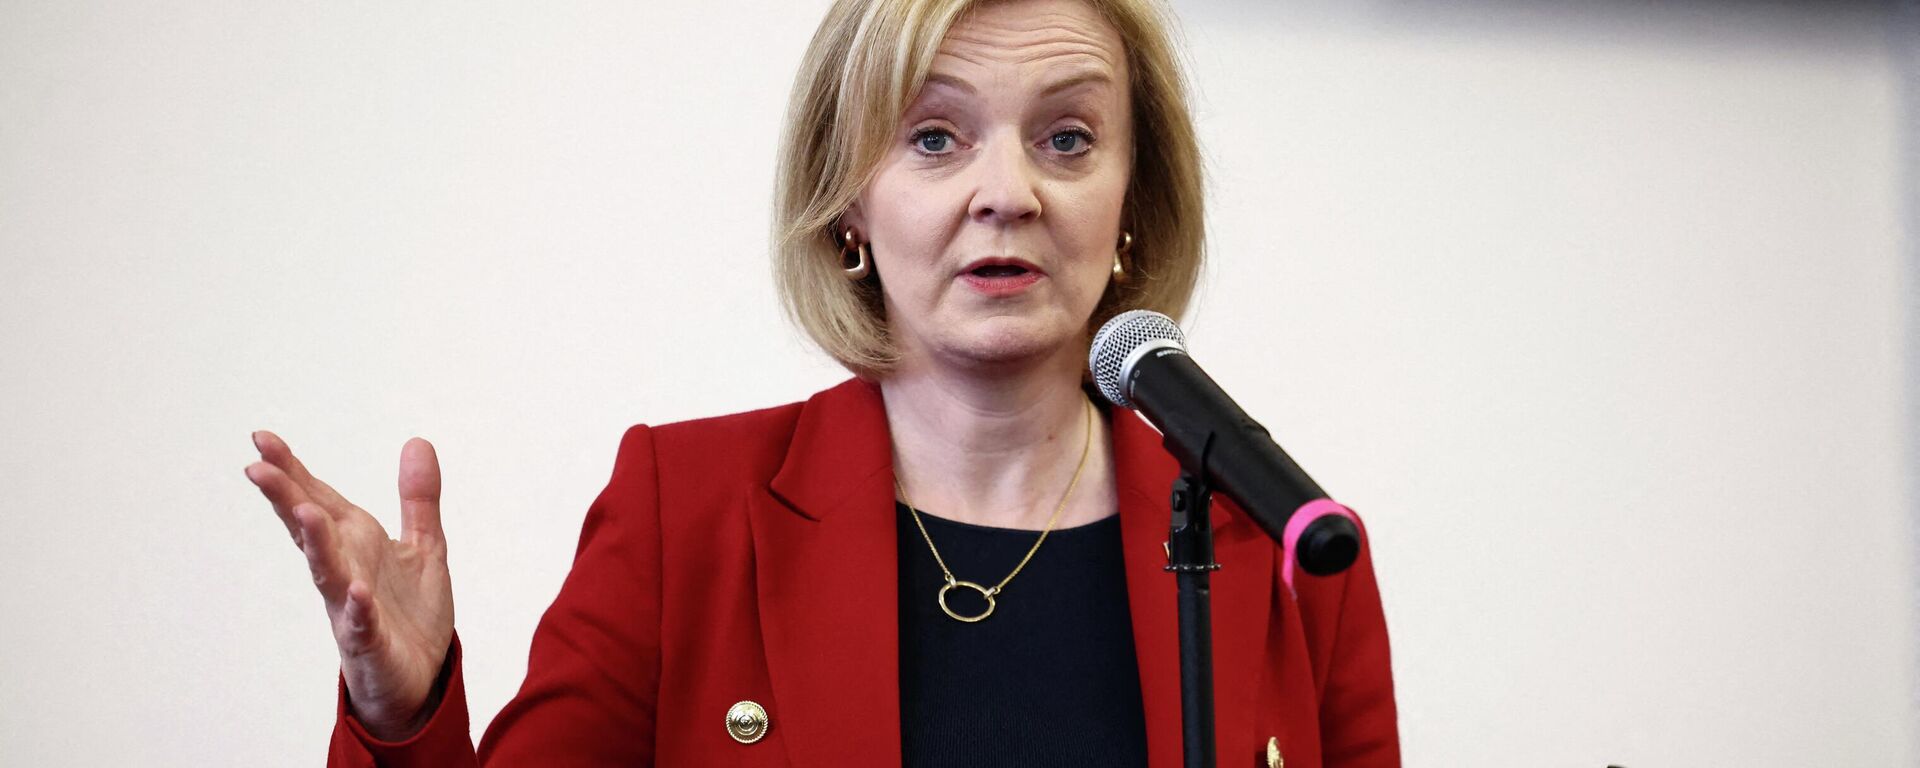 Contender to become the country's next Prime minister and leader of the Conservative party British Foreign Secretary Liz Truss delivers a speech during a campaign event in Leeds, on July 28, 2022 - Sputnik International, 1920, 01.09.2022